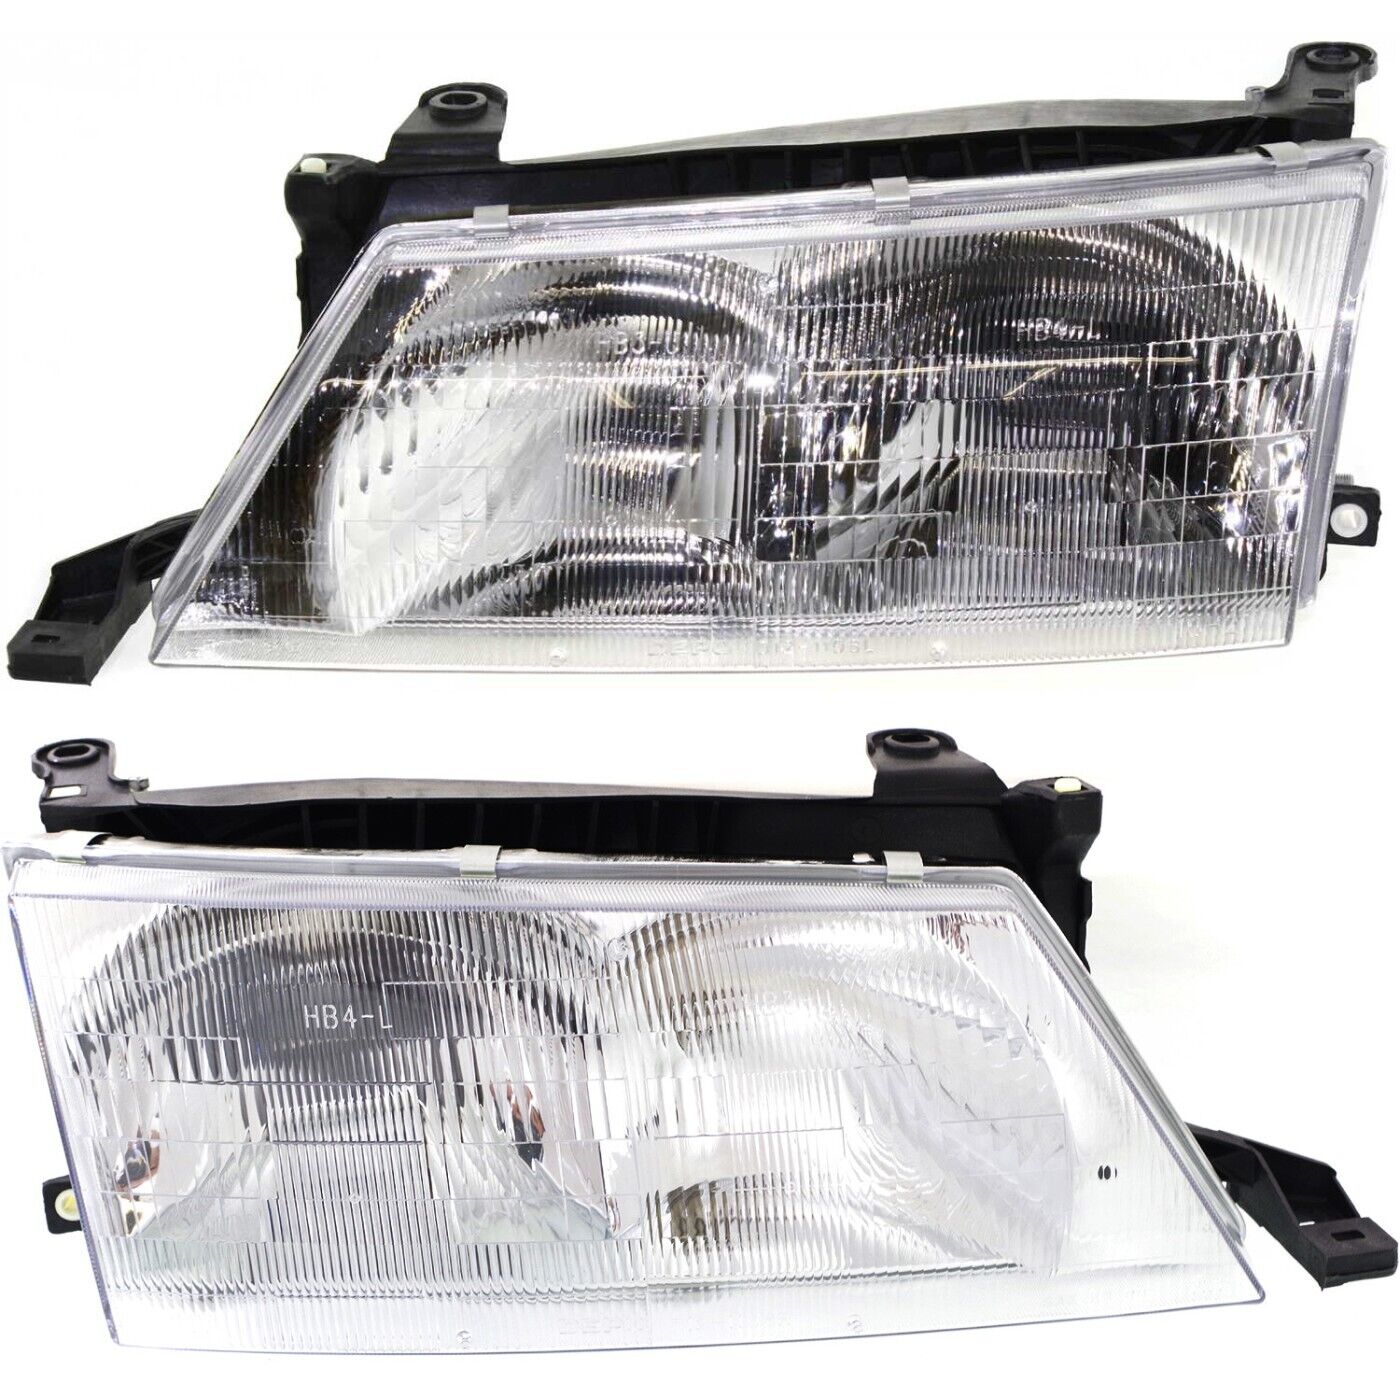 Headlight Set For 95 96 97 Toyota Avalon Left and Right With Bulb 2Pc